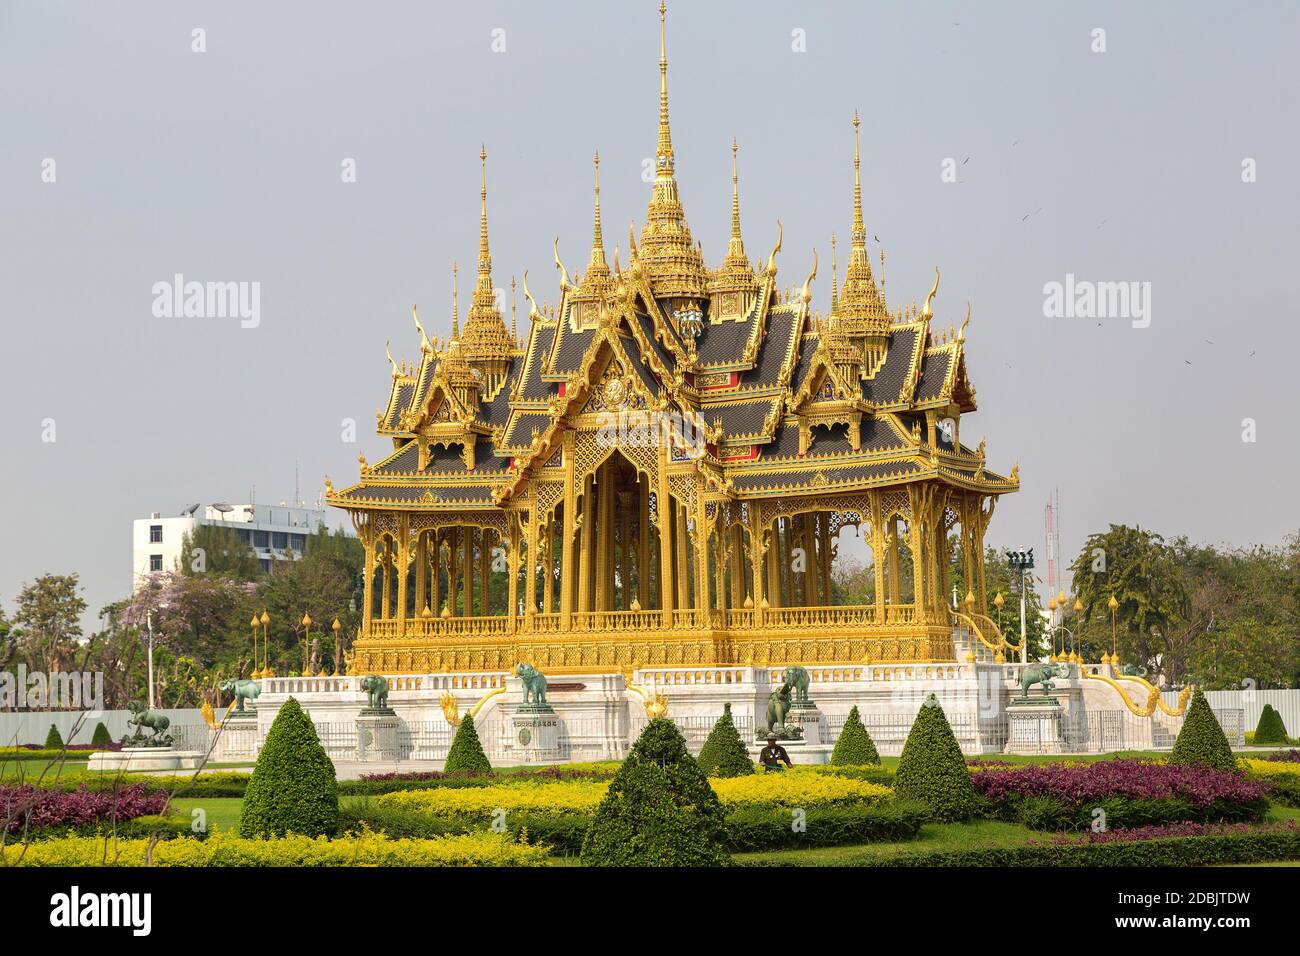 Memorial Crowns of the Auspice in Bangkok, Thailand in a summer day Stock Photo